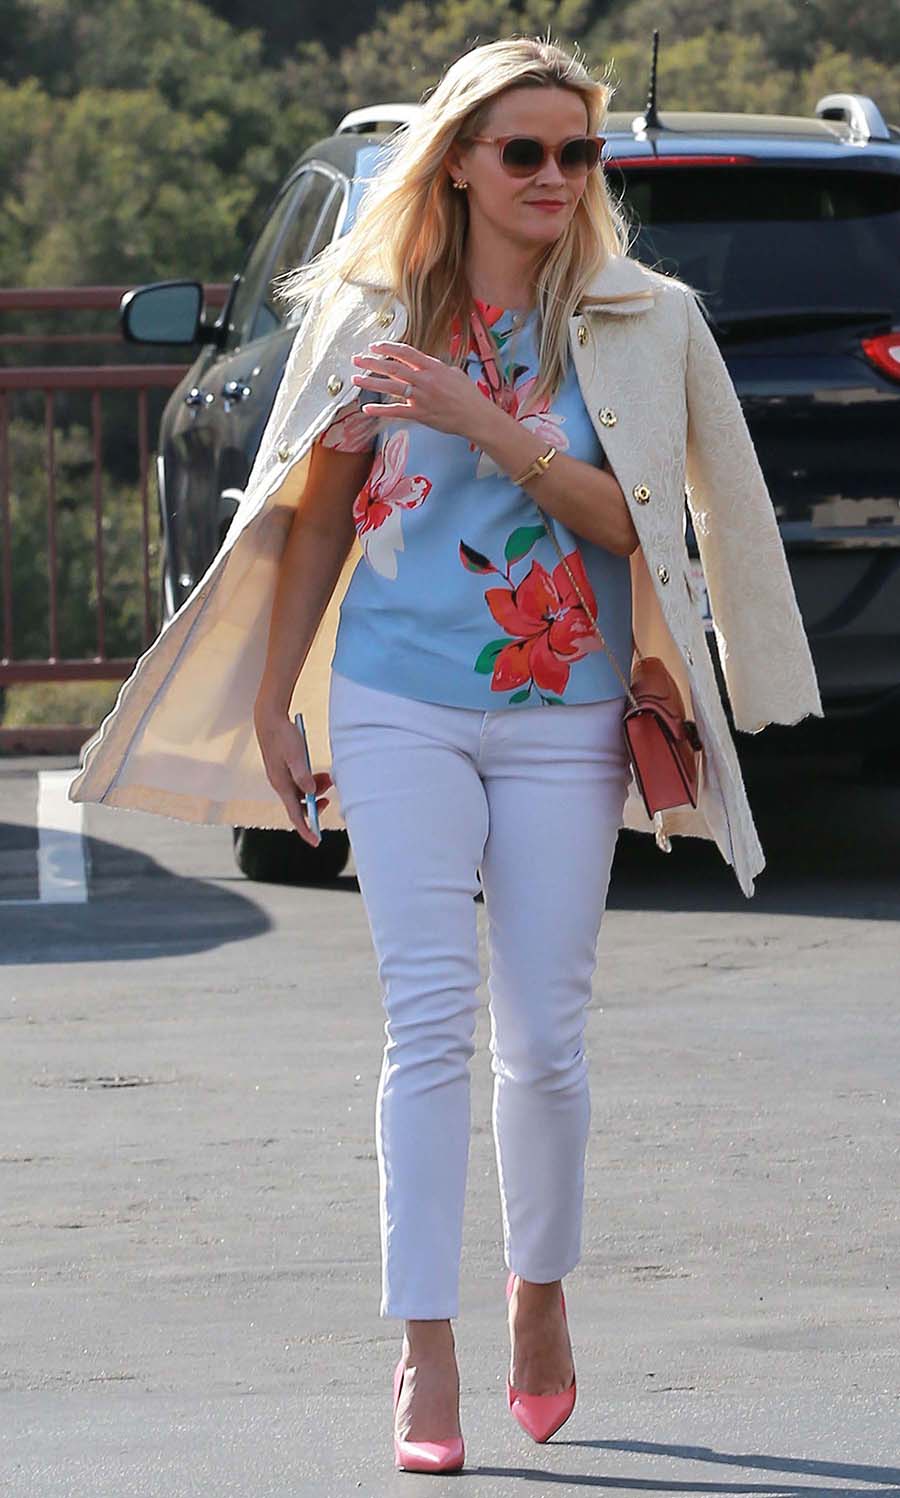 white-skinny-jeans-blue-light-top-floral-print-pink-shoe-pumps-white-jacket-coat-pink-bag-sun-reesewitherspoon-howtowear-style-spring-summer-blonde-lunch.jpg